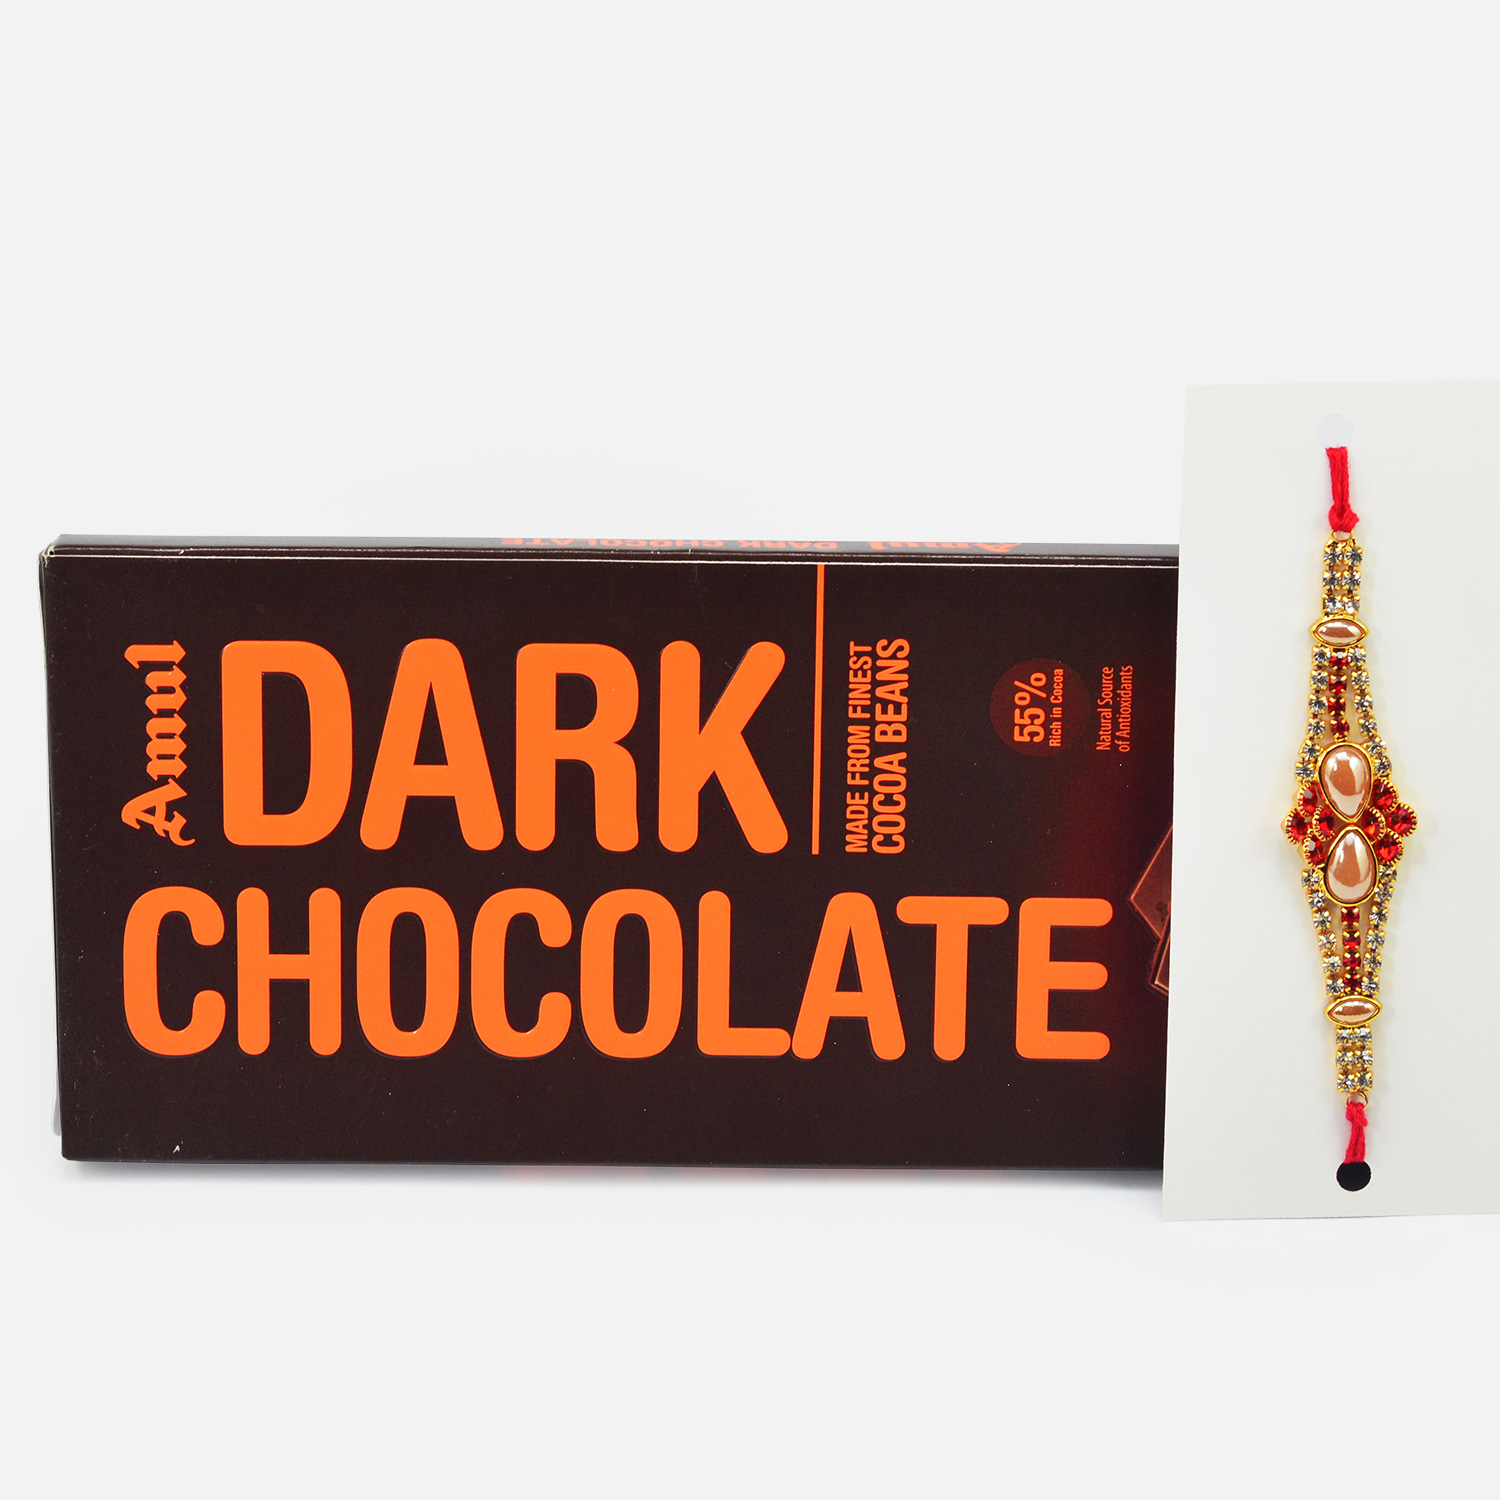 Amul Dark Chocolate with Rakhi of Jewels for Brother